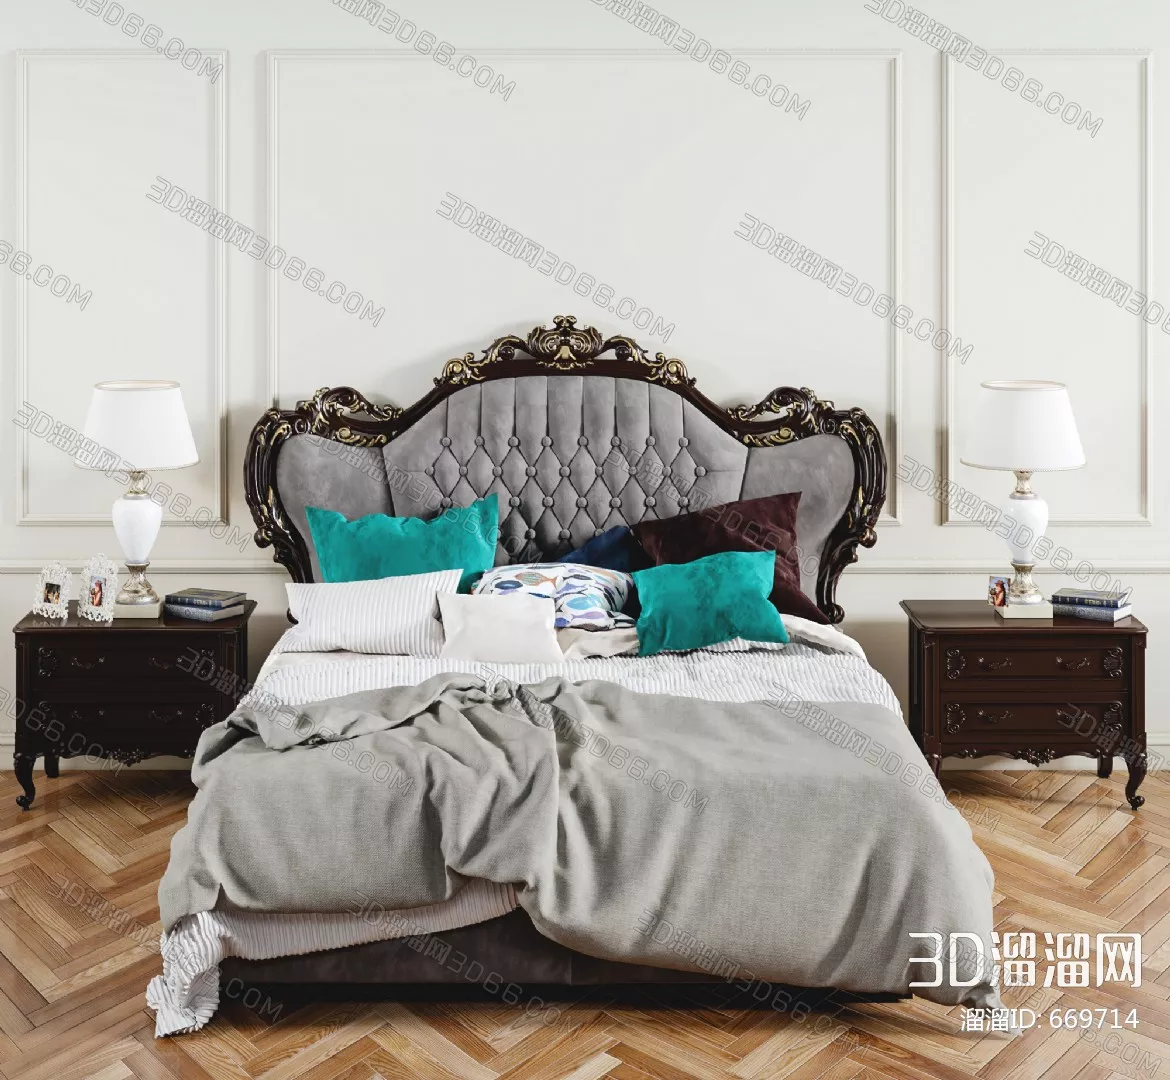 NEO CLASSIC BED - SKETCHUP 3D MODEL - VRAY OR ENSCAPE - ID17006